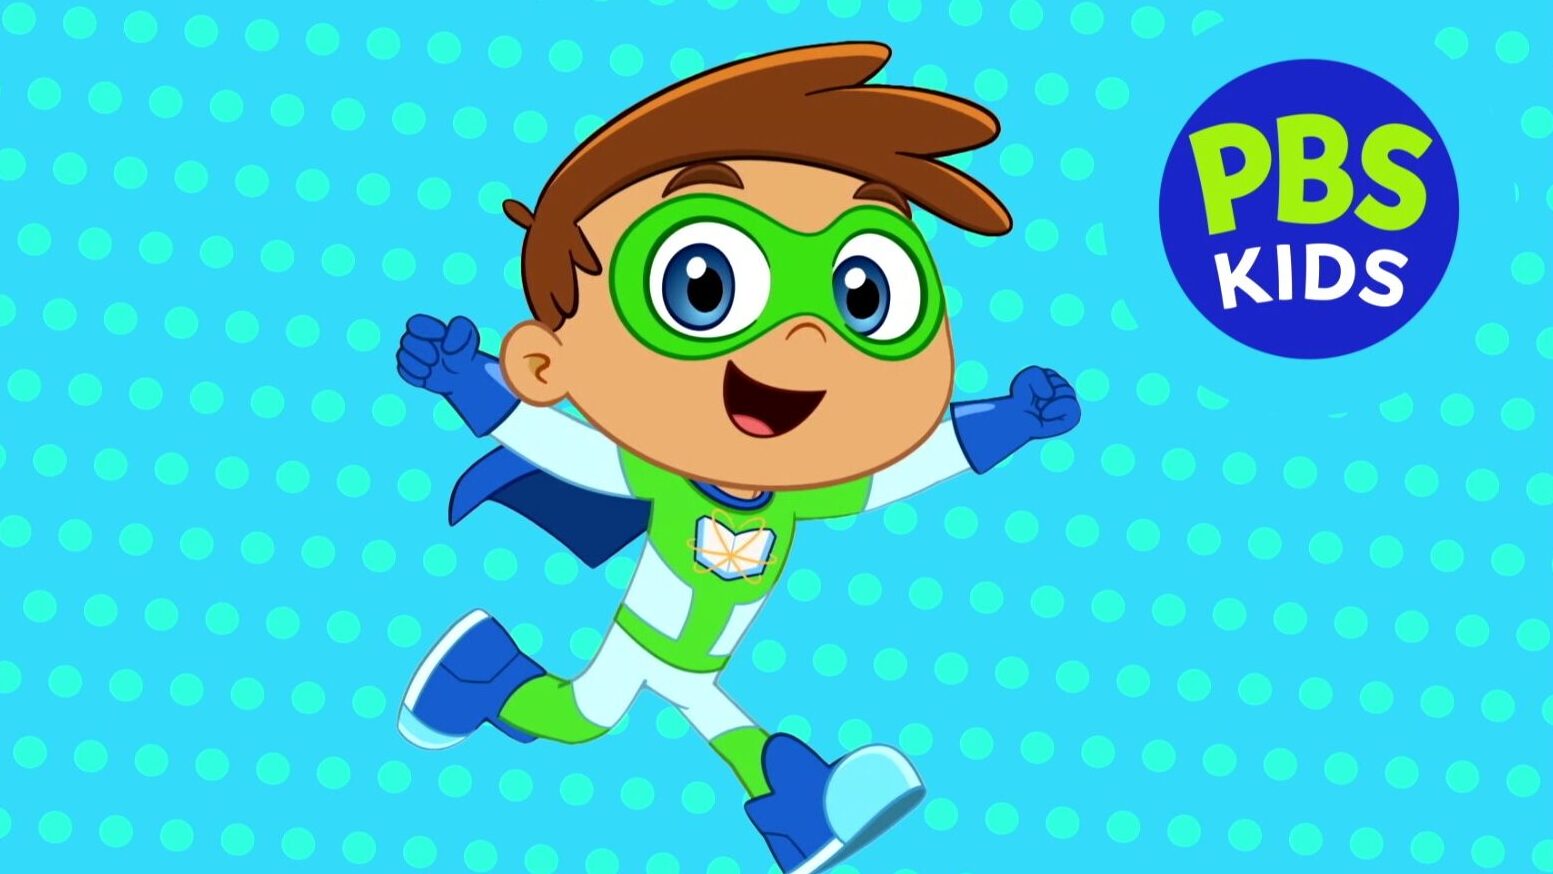 The PBS KIDS character Super Why is smiling with his hands raised in the air.